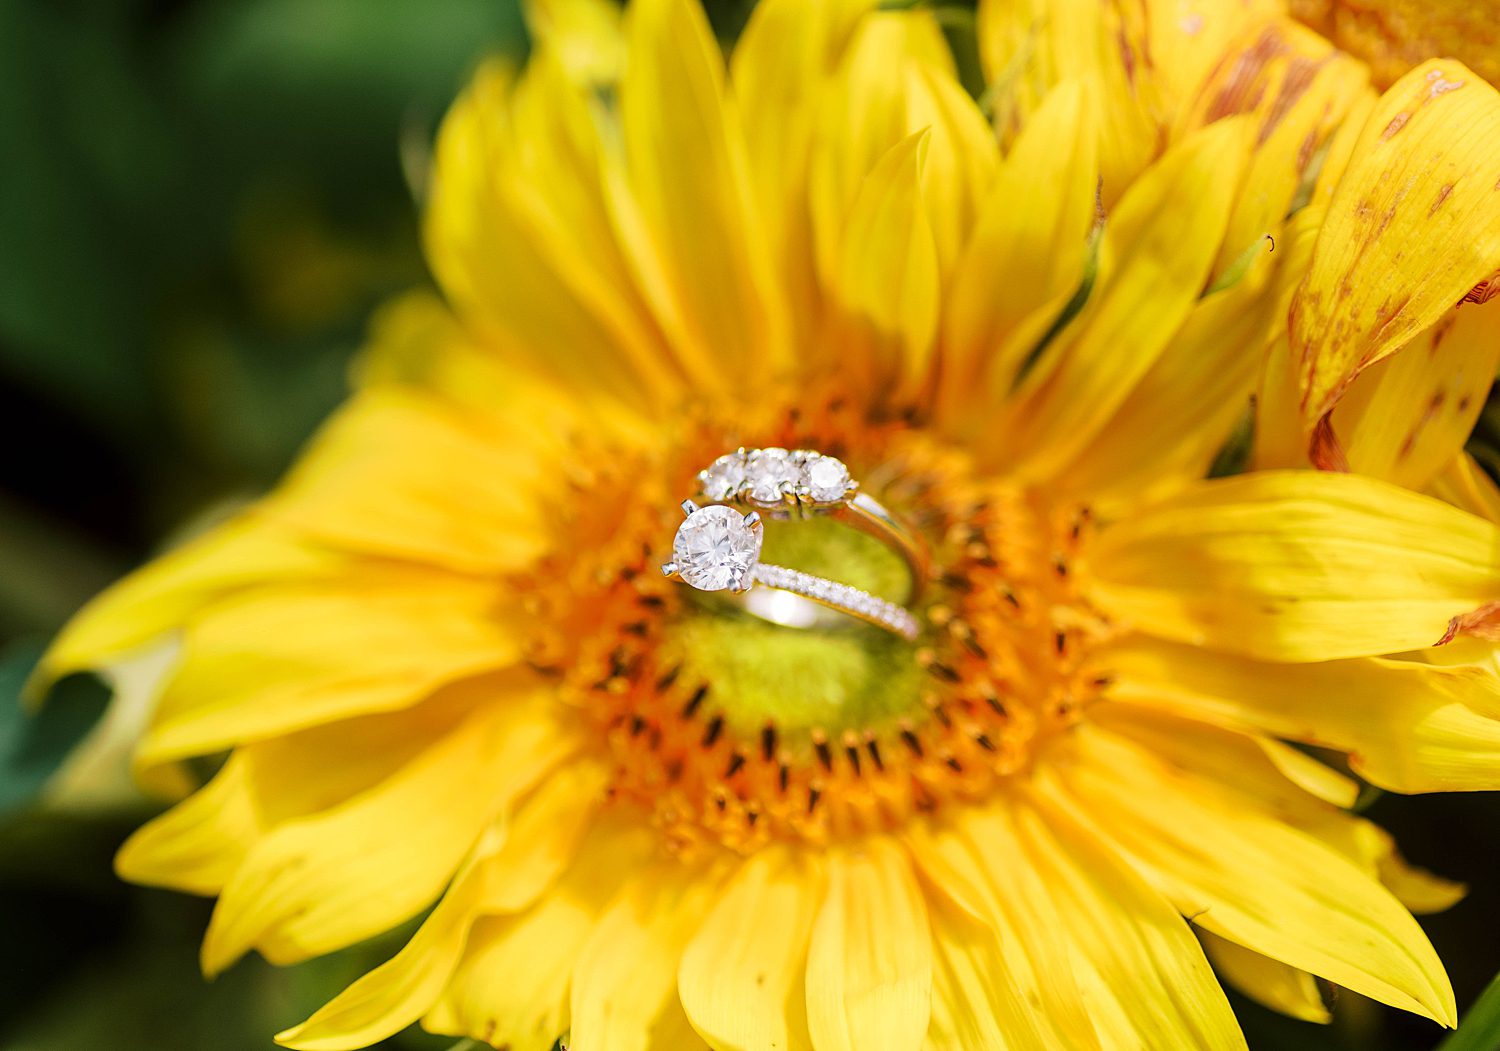 engagement ring rests in sunflower